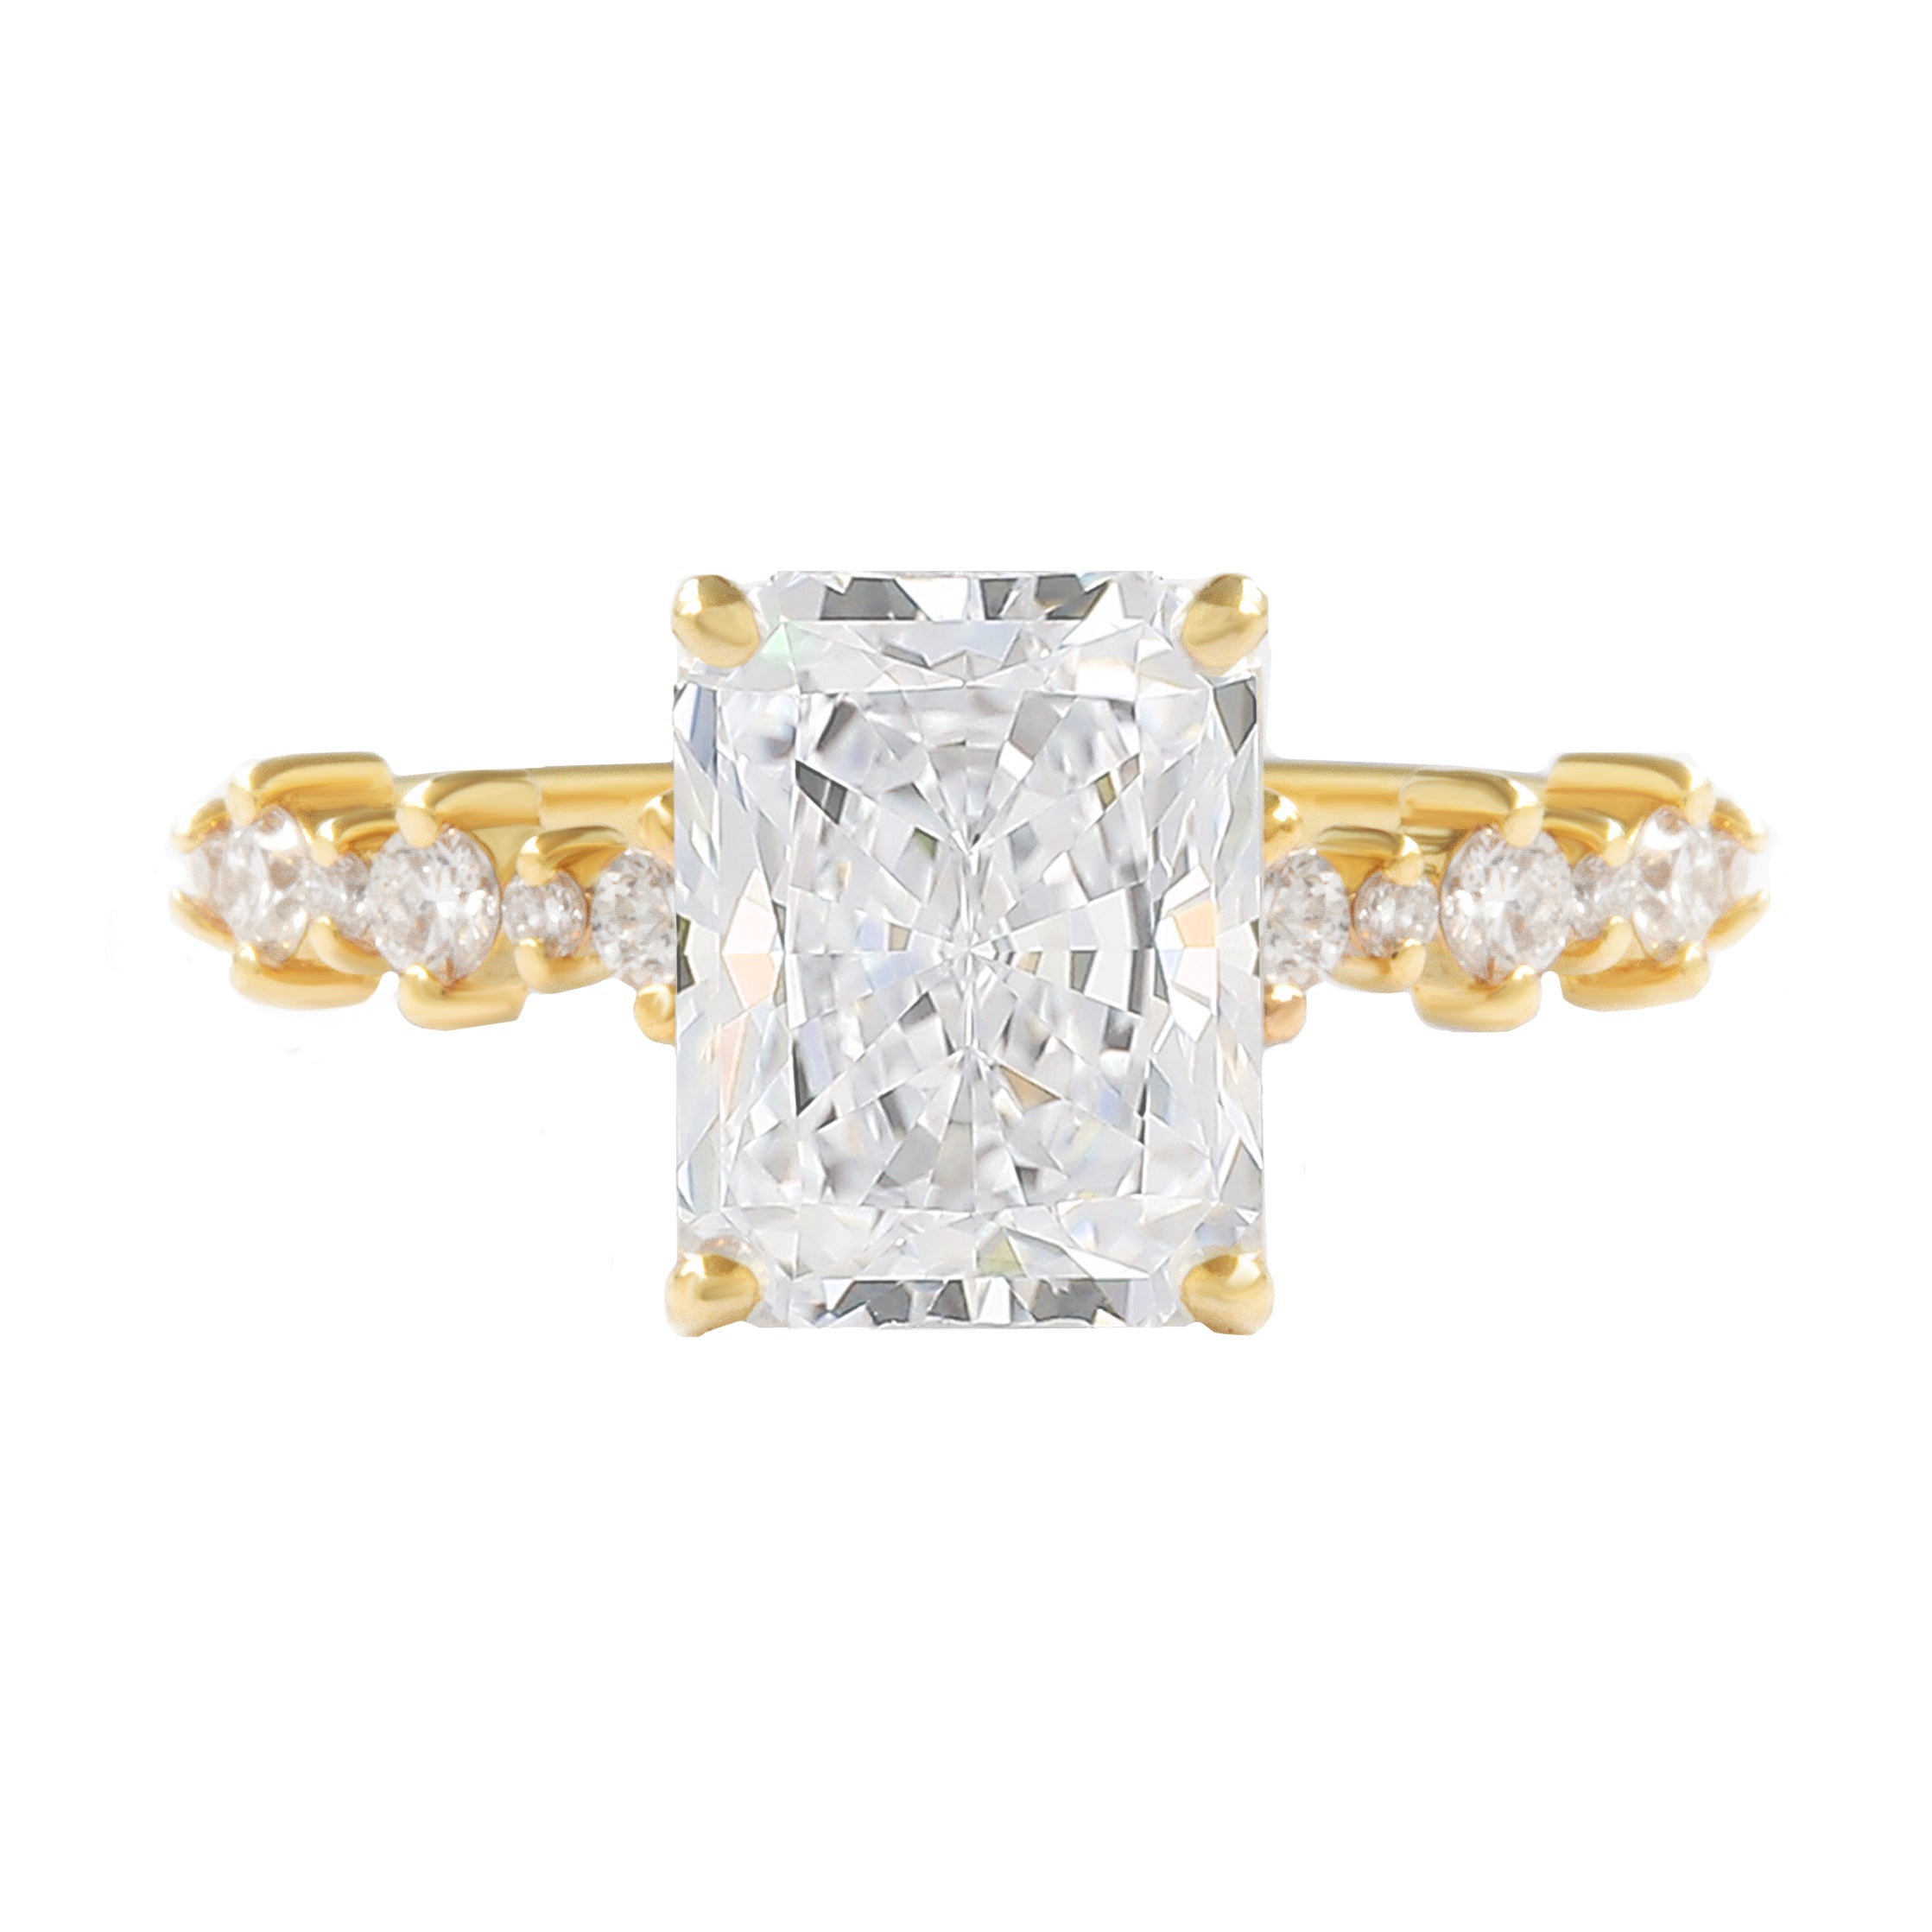 Radiant Moissanite Classic Engagement ring with Diamond Dots Band - Margo - 14K Yellow Gold, Size 5.75, - READY TO SHIP!